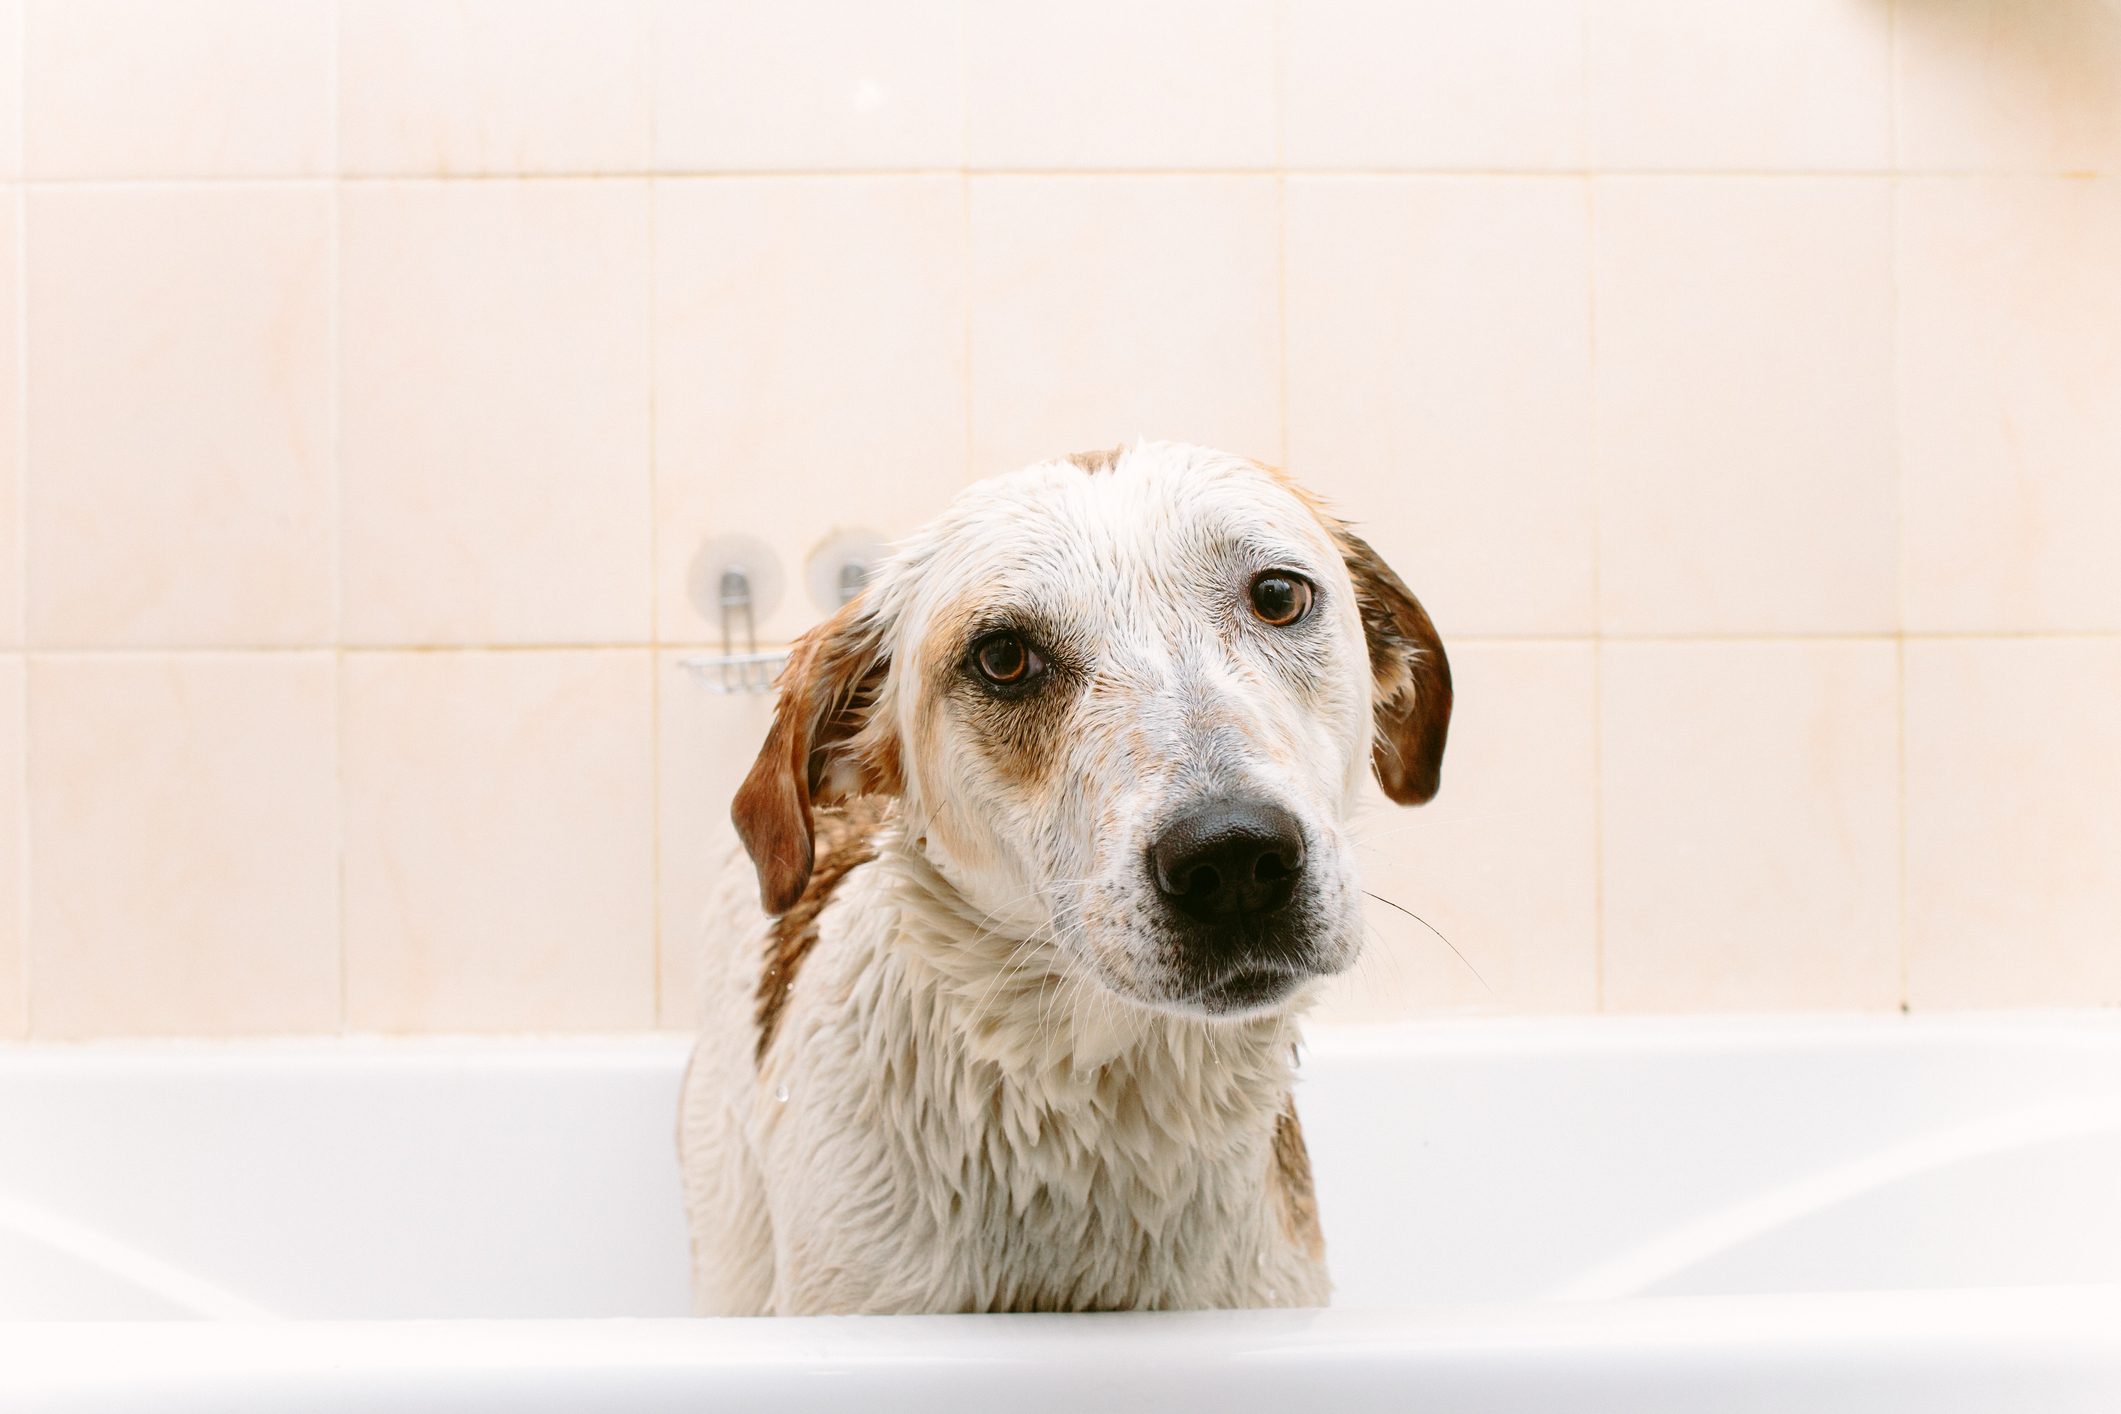 5 Tips for Getting Dog Smell Out of House | The Family Handyman